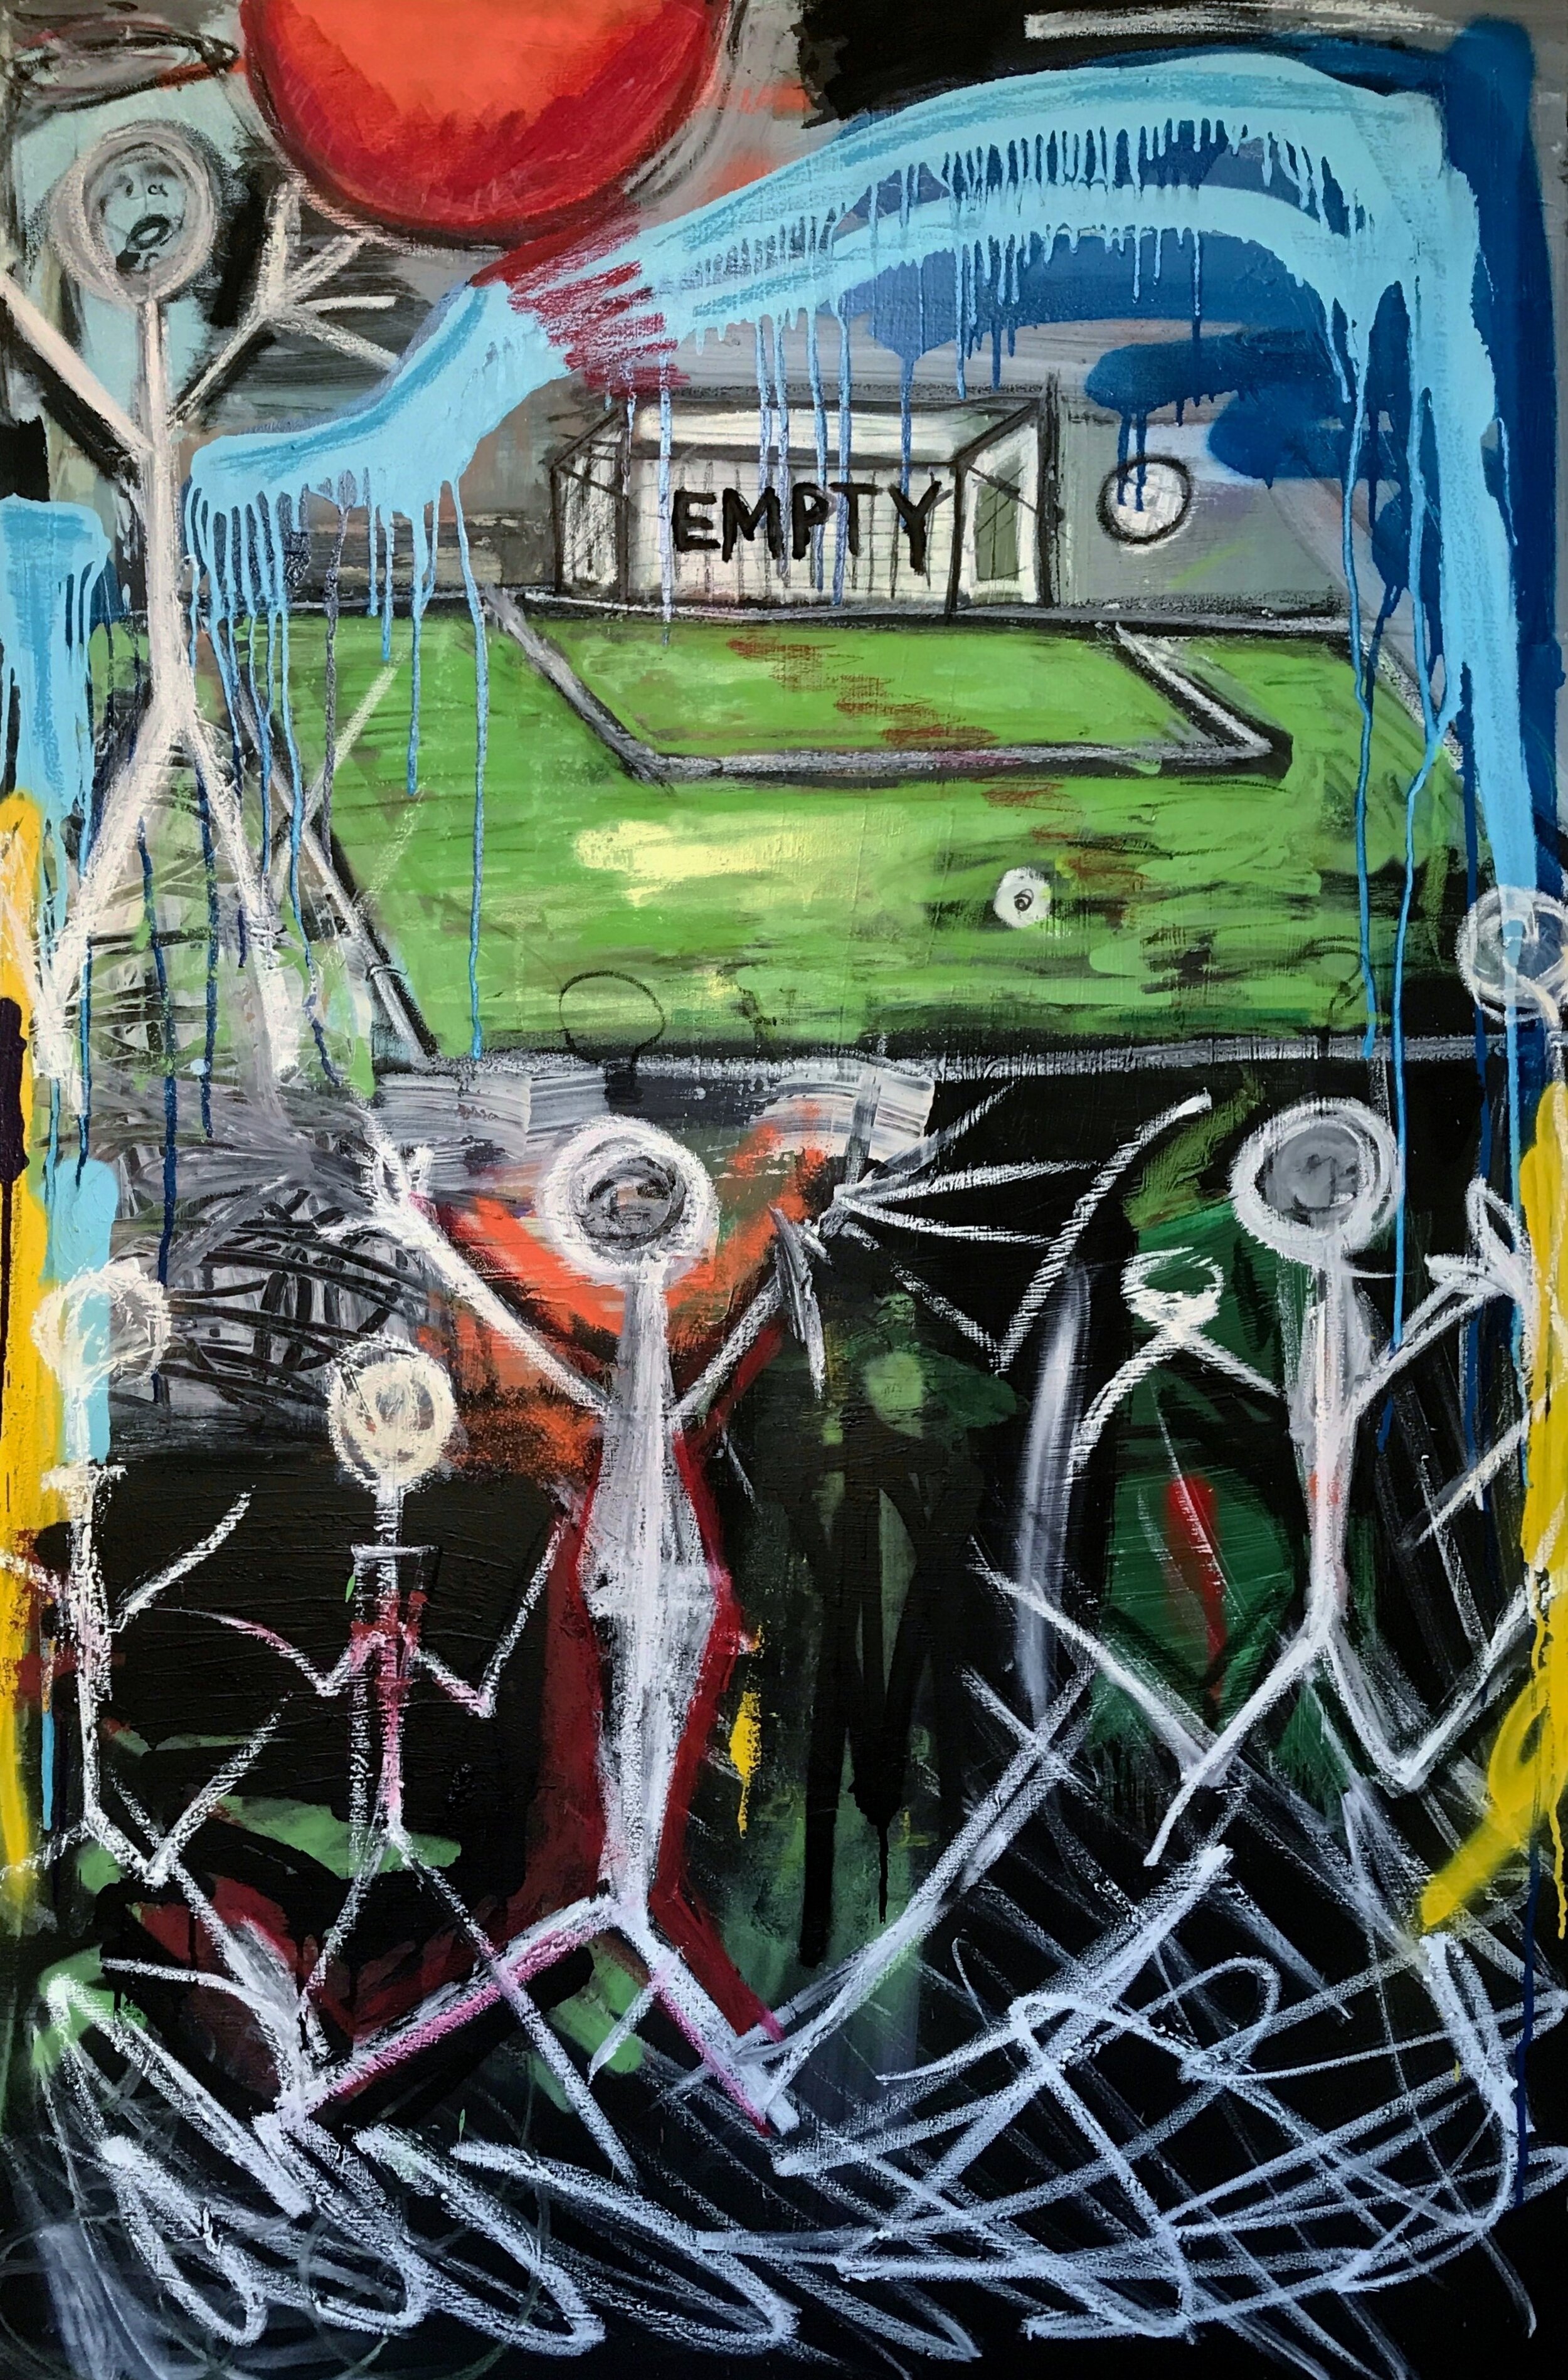 "Empty" an artwork about childhood and the games we play in life as adults, PIGSY artwork now sold in private art collection in South Dublin (Copy) (Copy) (Copy)